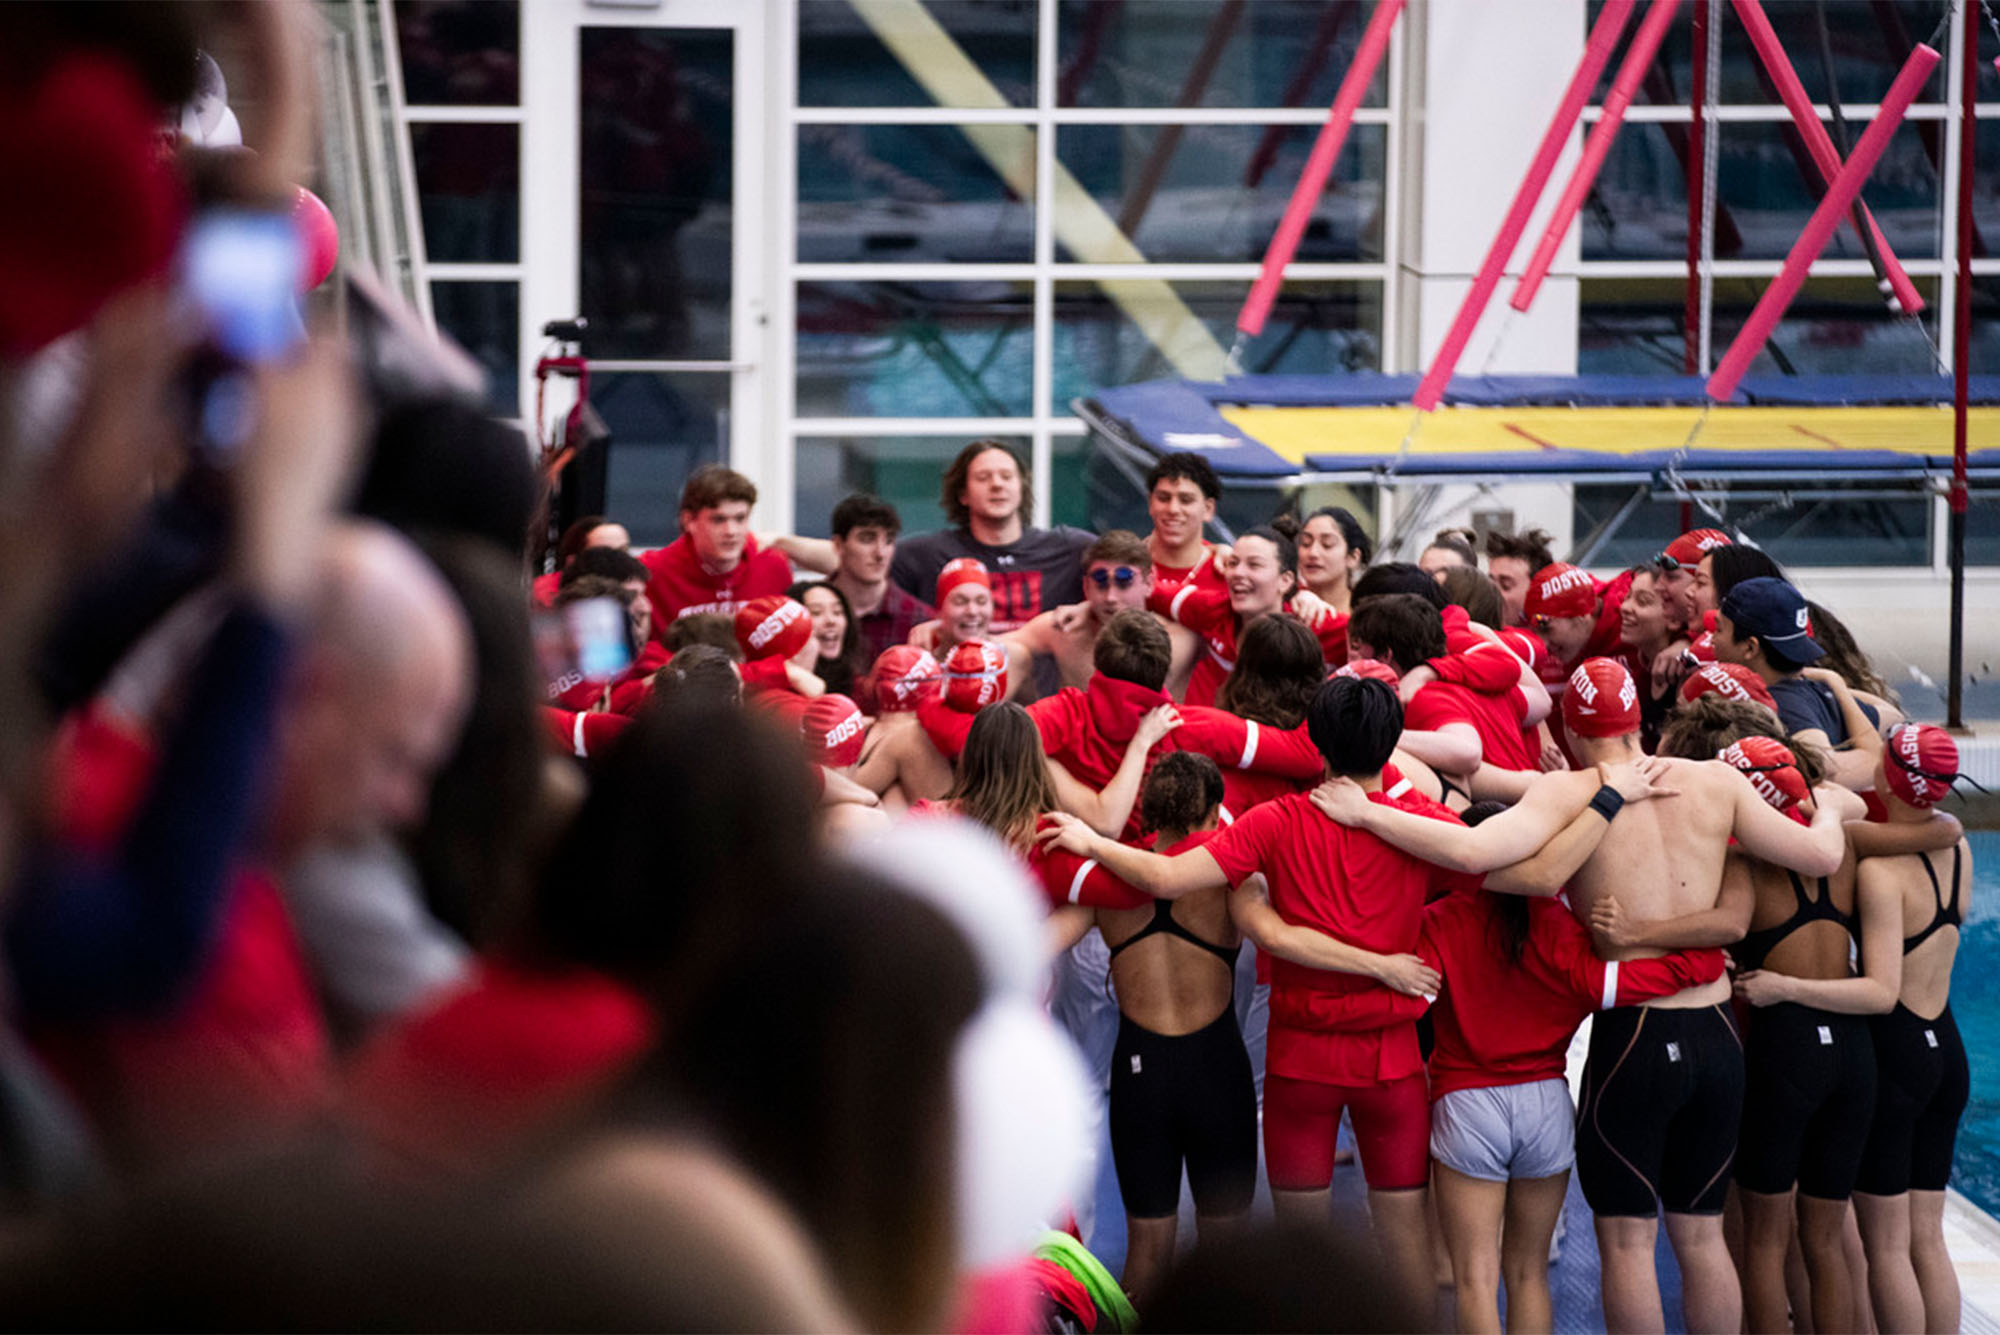 Photo: A large group of college students on the Boston University Swim and Dive team gather in a large group at a recent meet